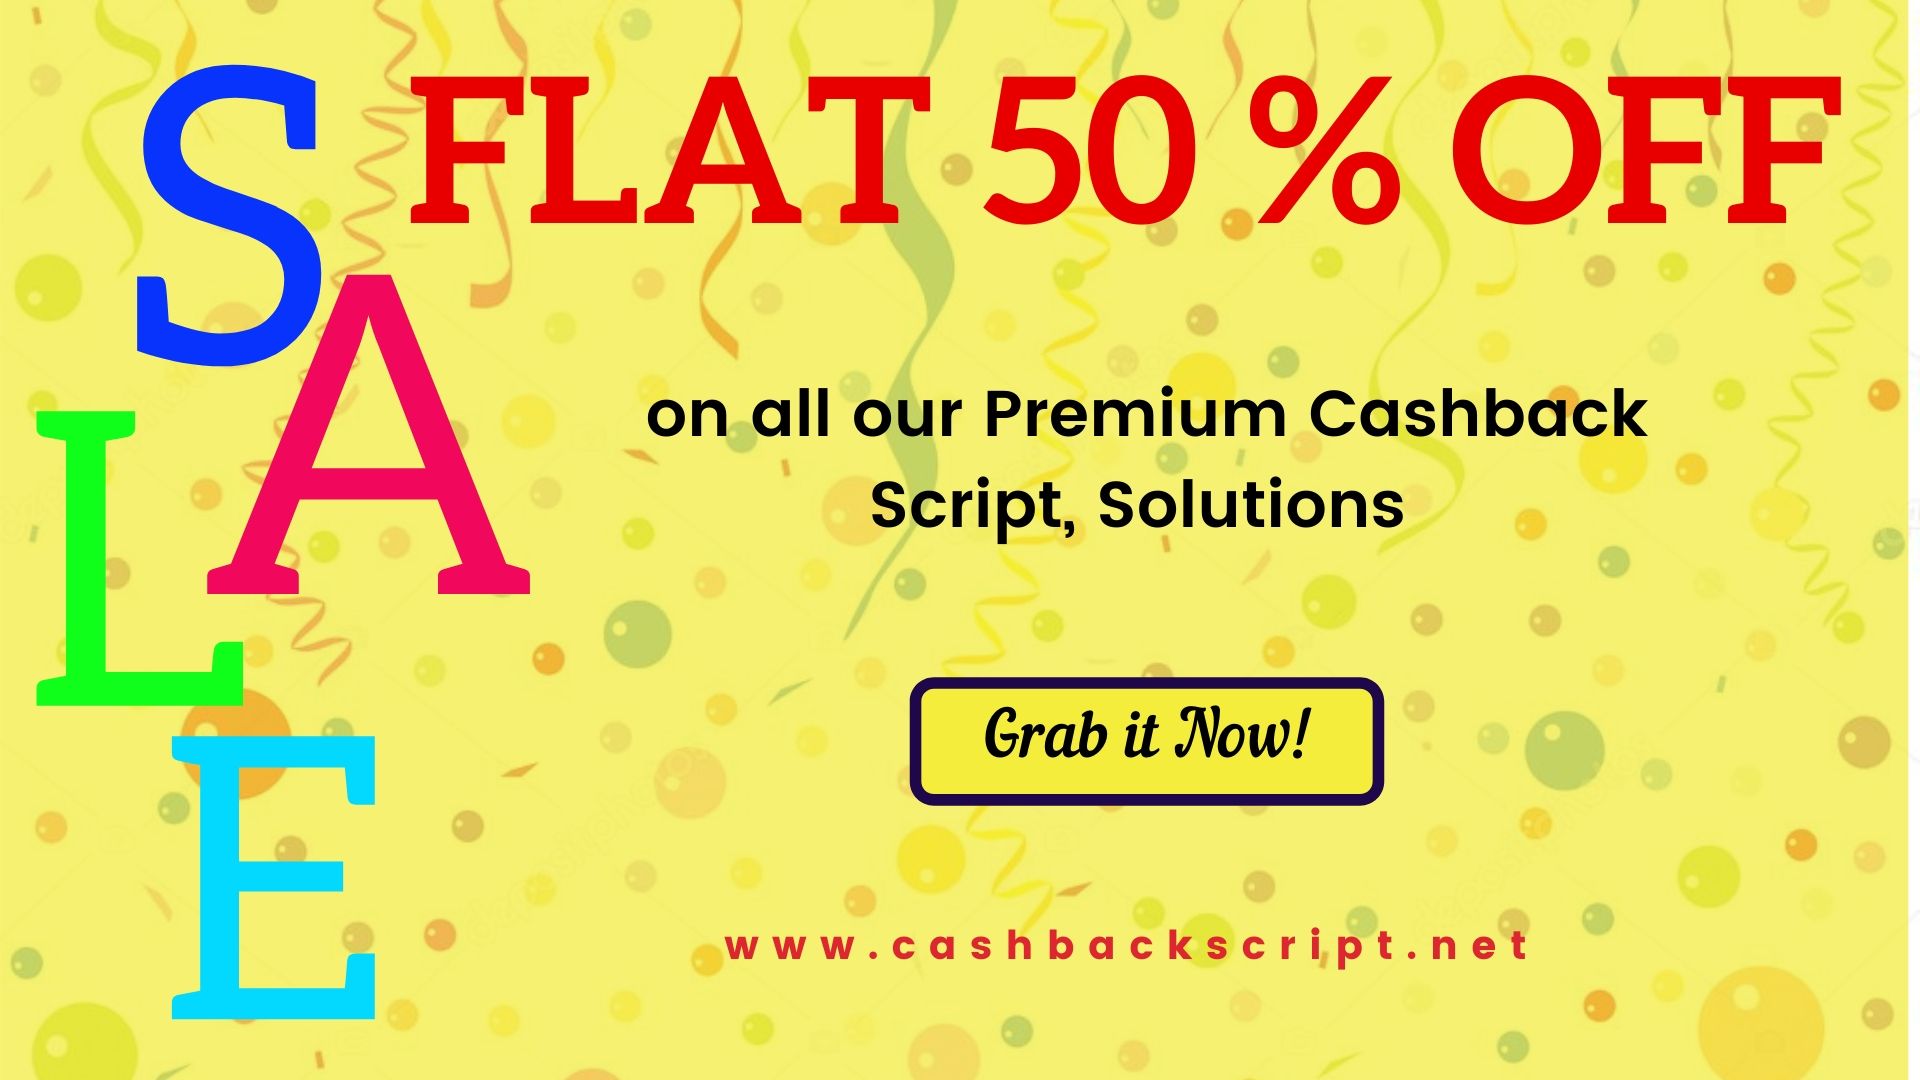 Flat 50 % OFF on all our Premium Cashback Solutions - Limited Time Offer